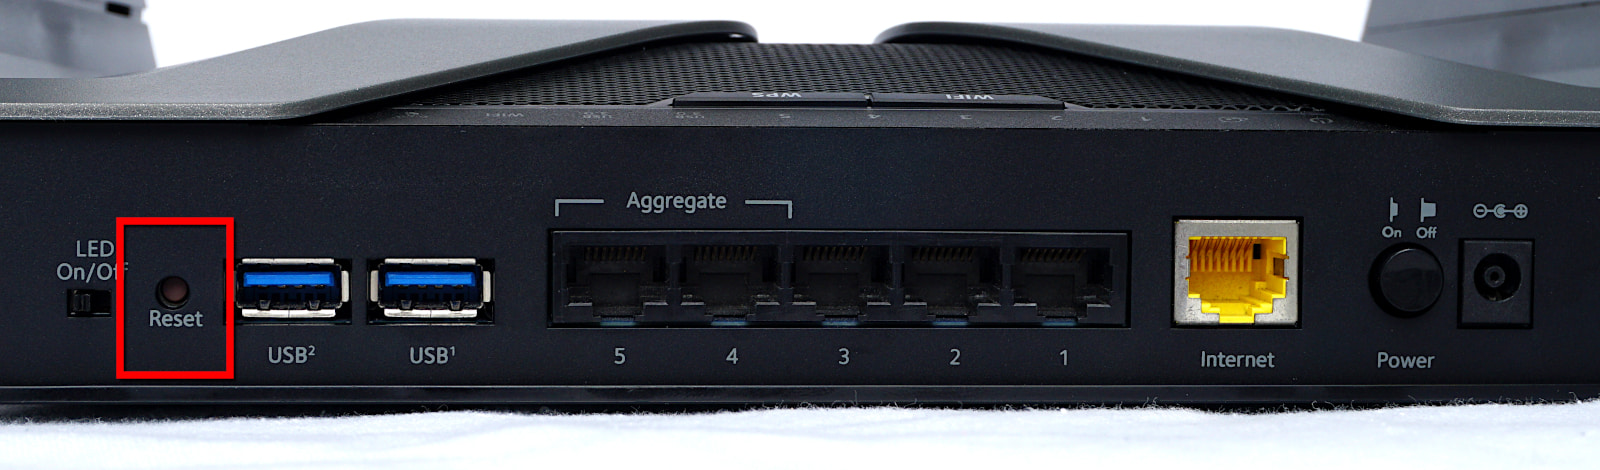 Reset button on left hand side of rear of NETGEAR router